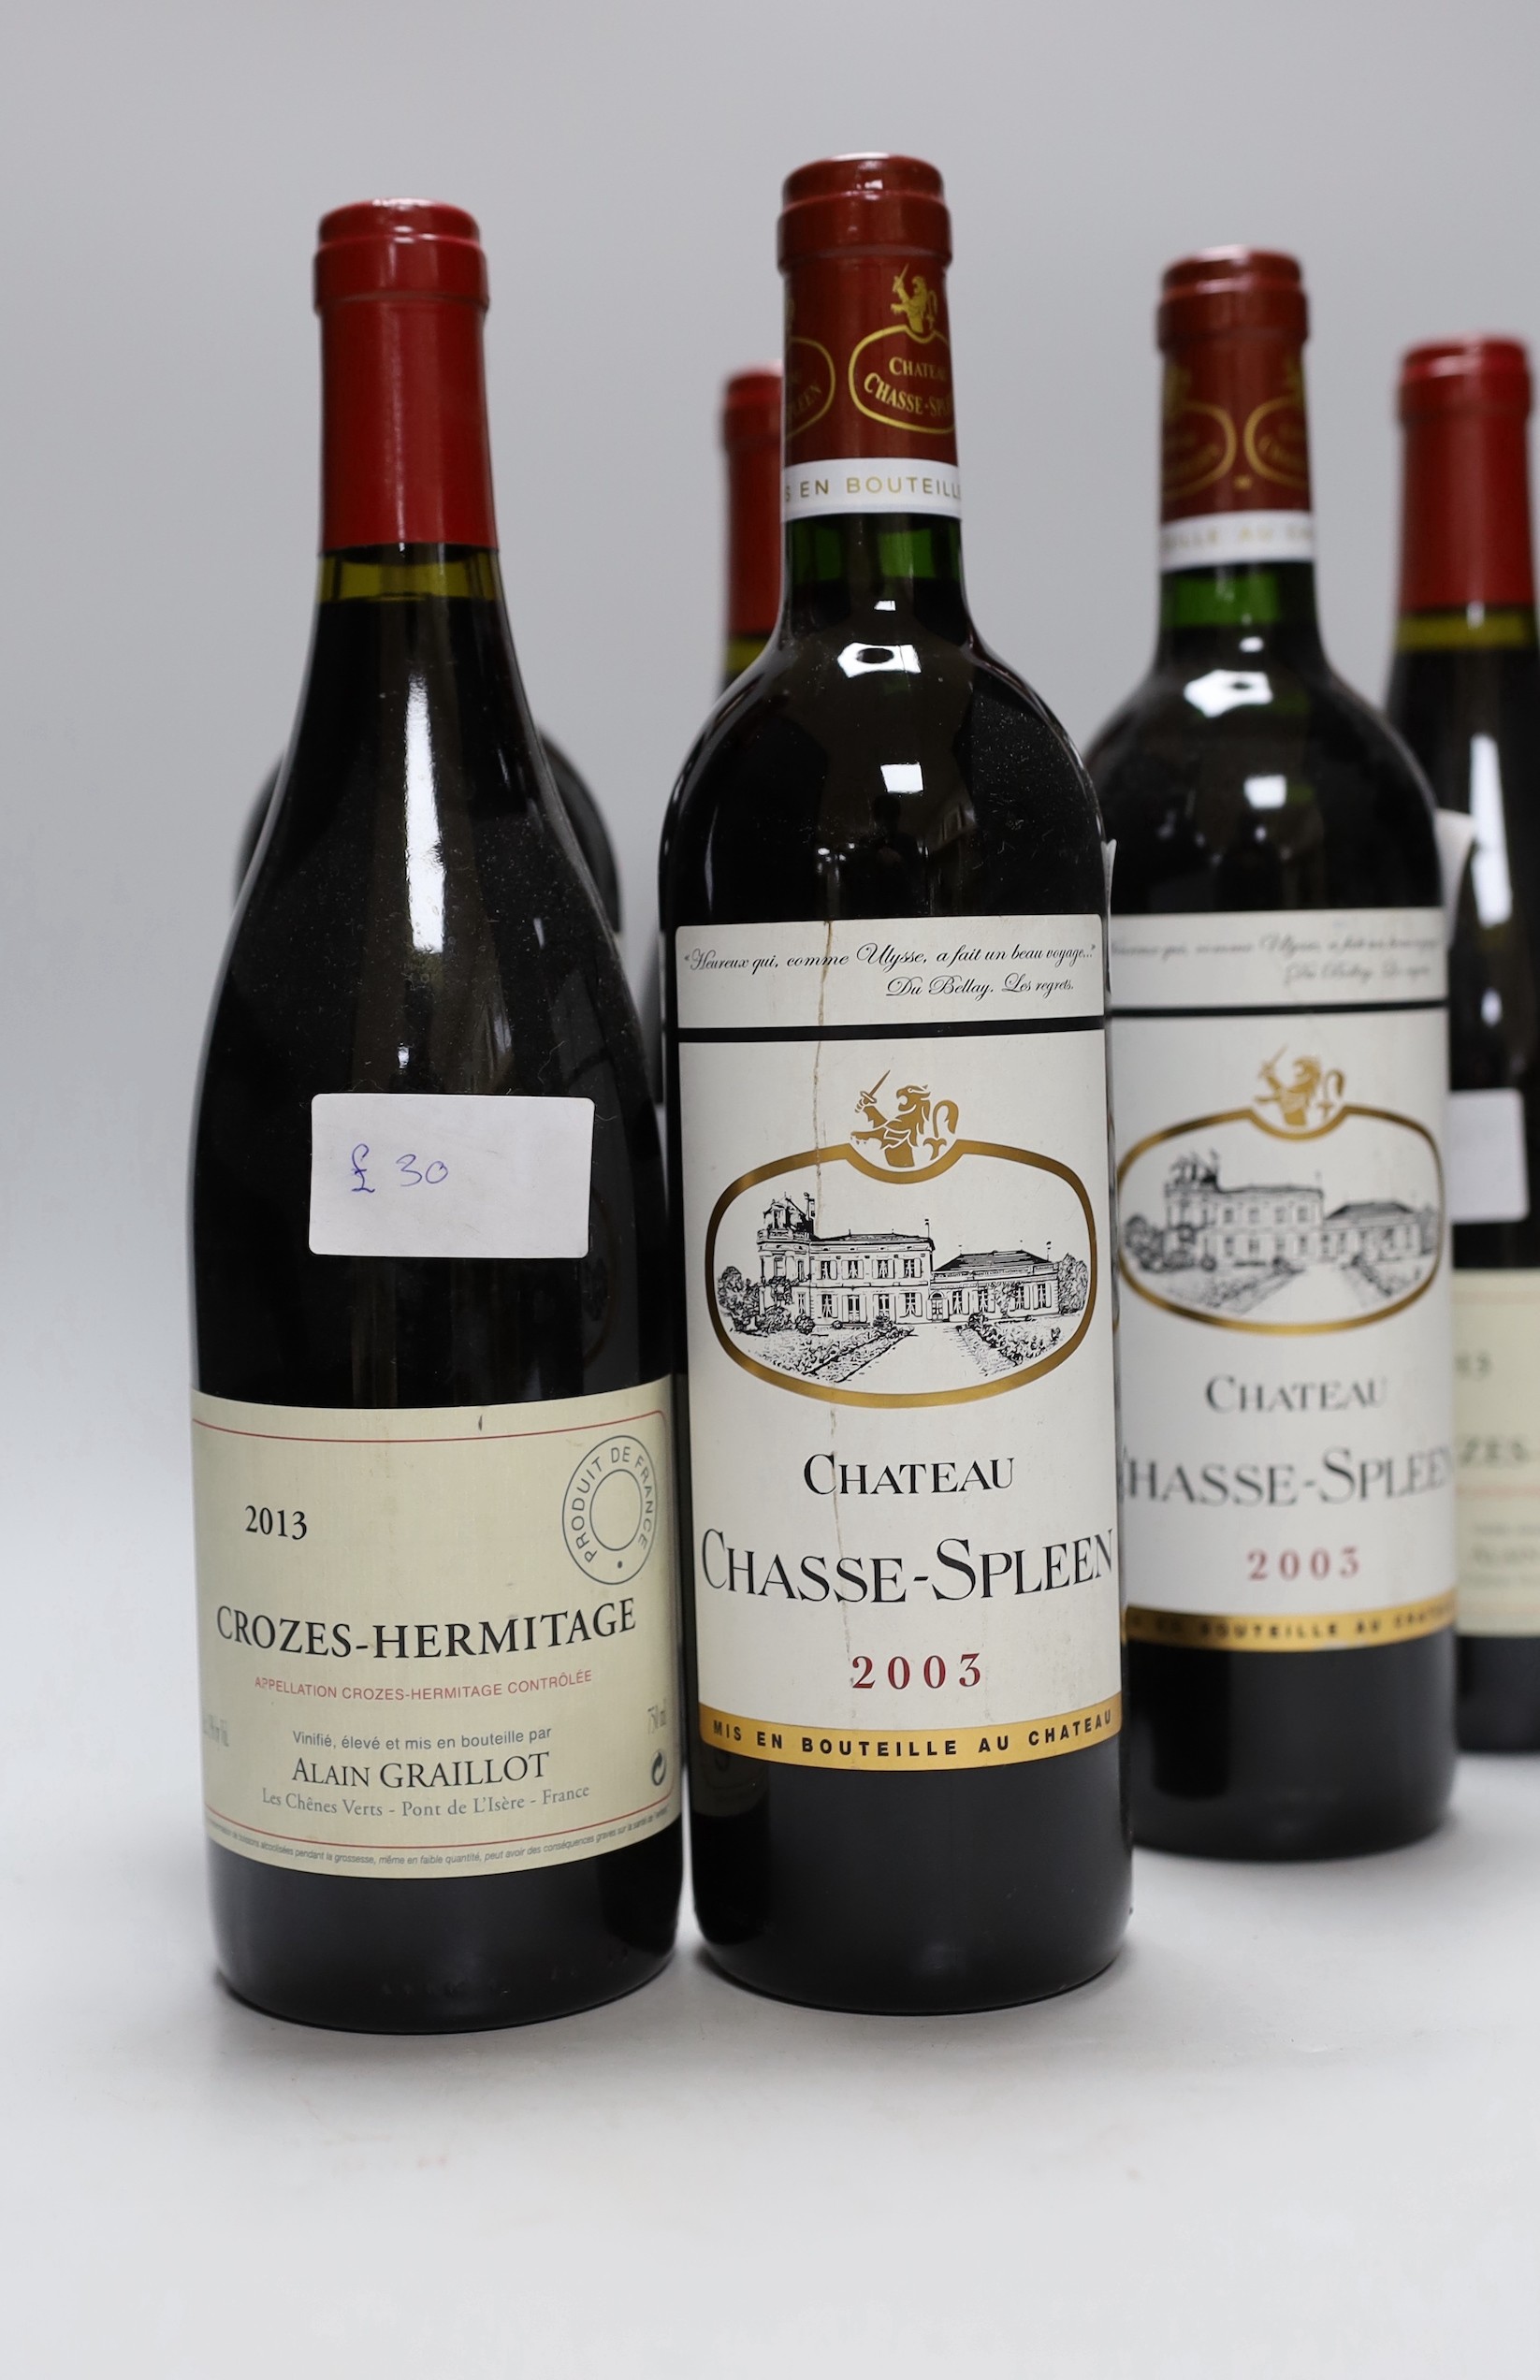 Three bottles of Crozes-Hermitage 2013 and three bottles of Chateau Chase-Spleen 2003